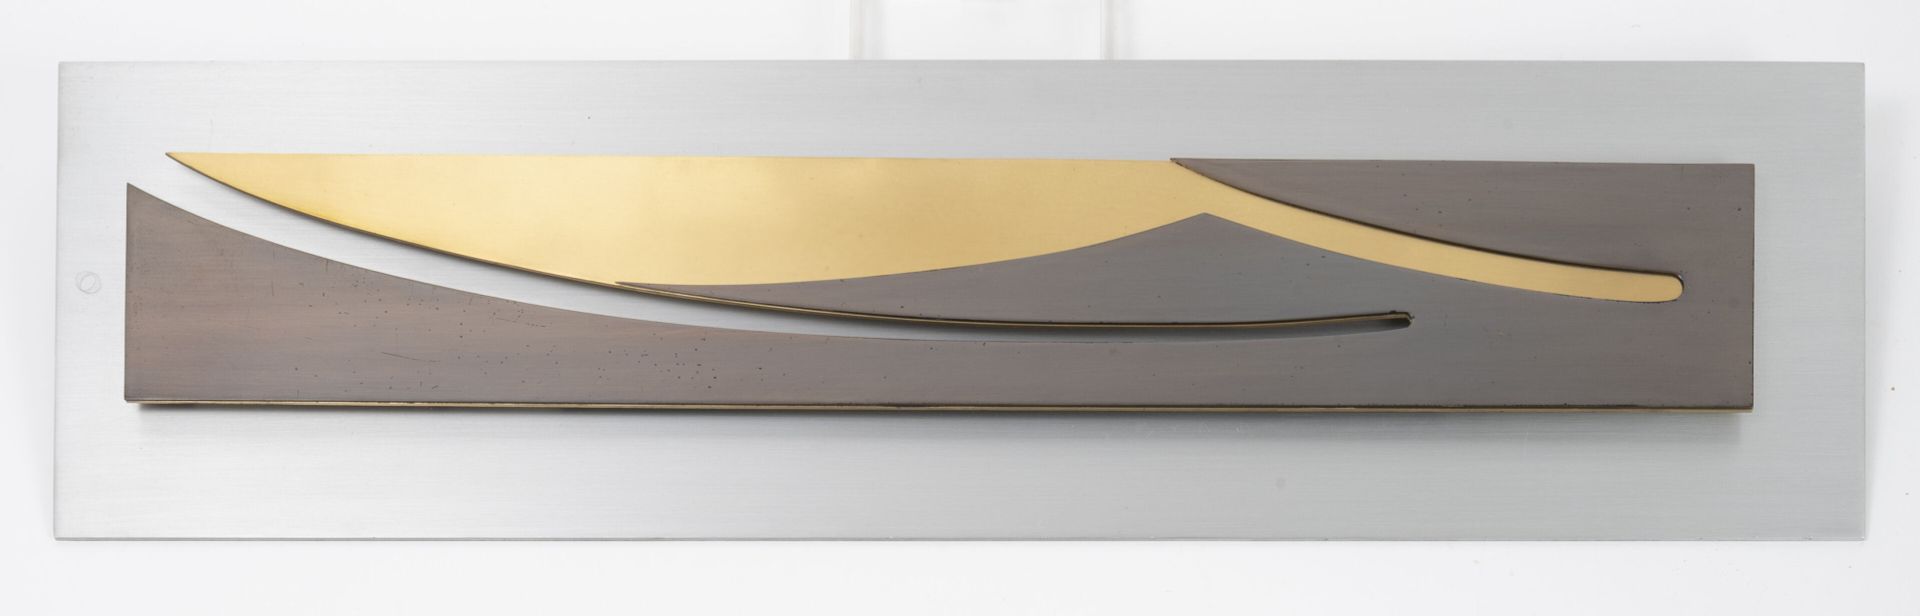 Jean LEGROS (1917-1981) Relief, circa 1970.
Brass, patinated brass and aluminum.&hellip;